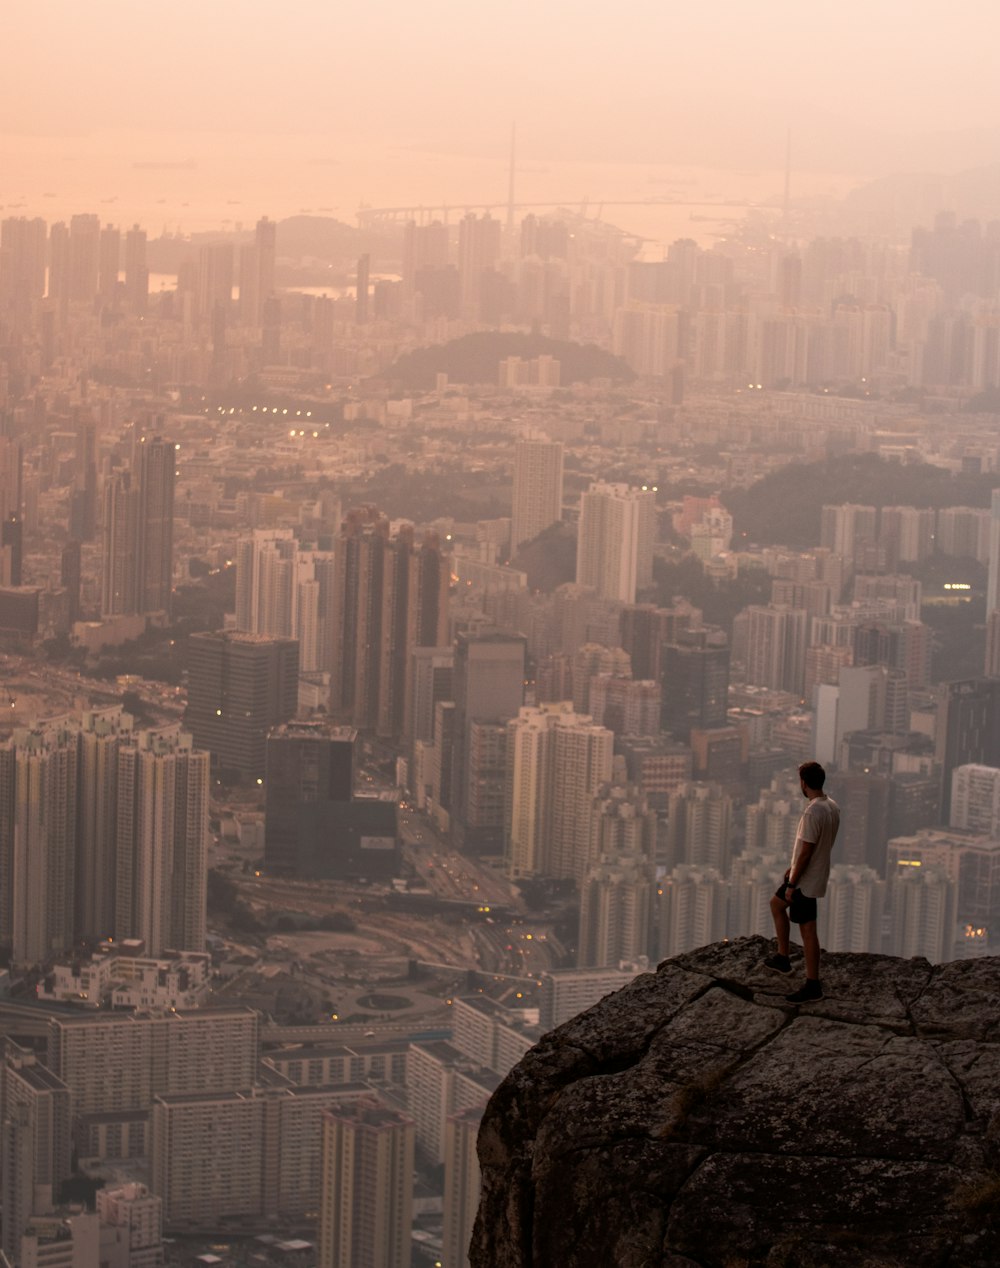 man sitting on rock looking at city skyline during daytime